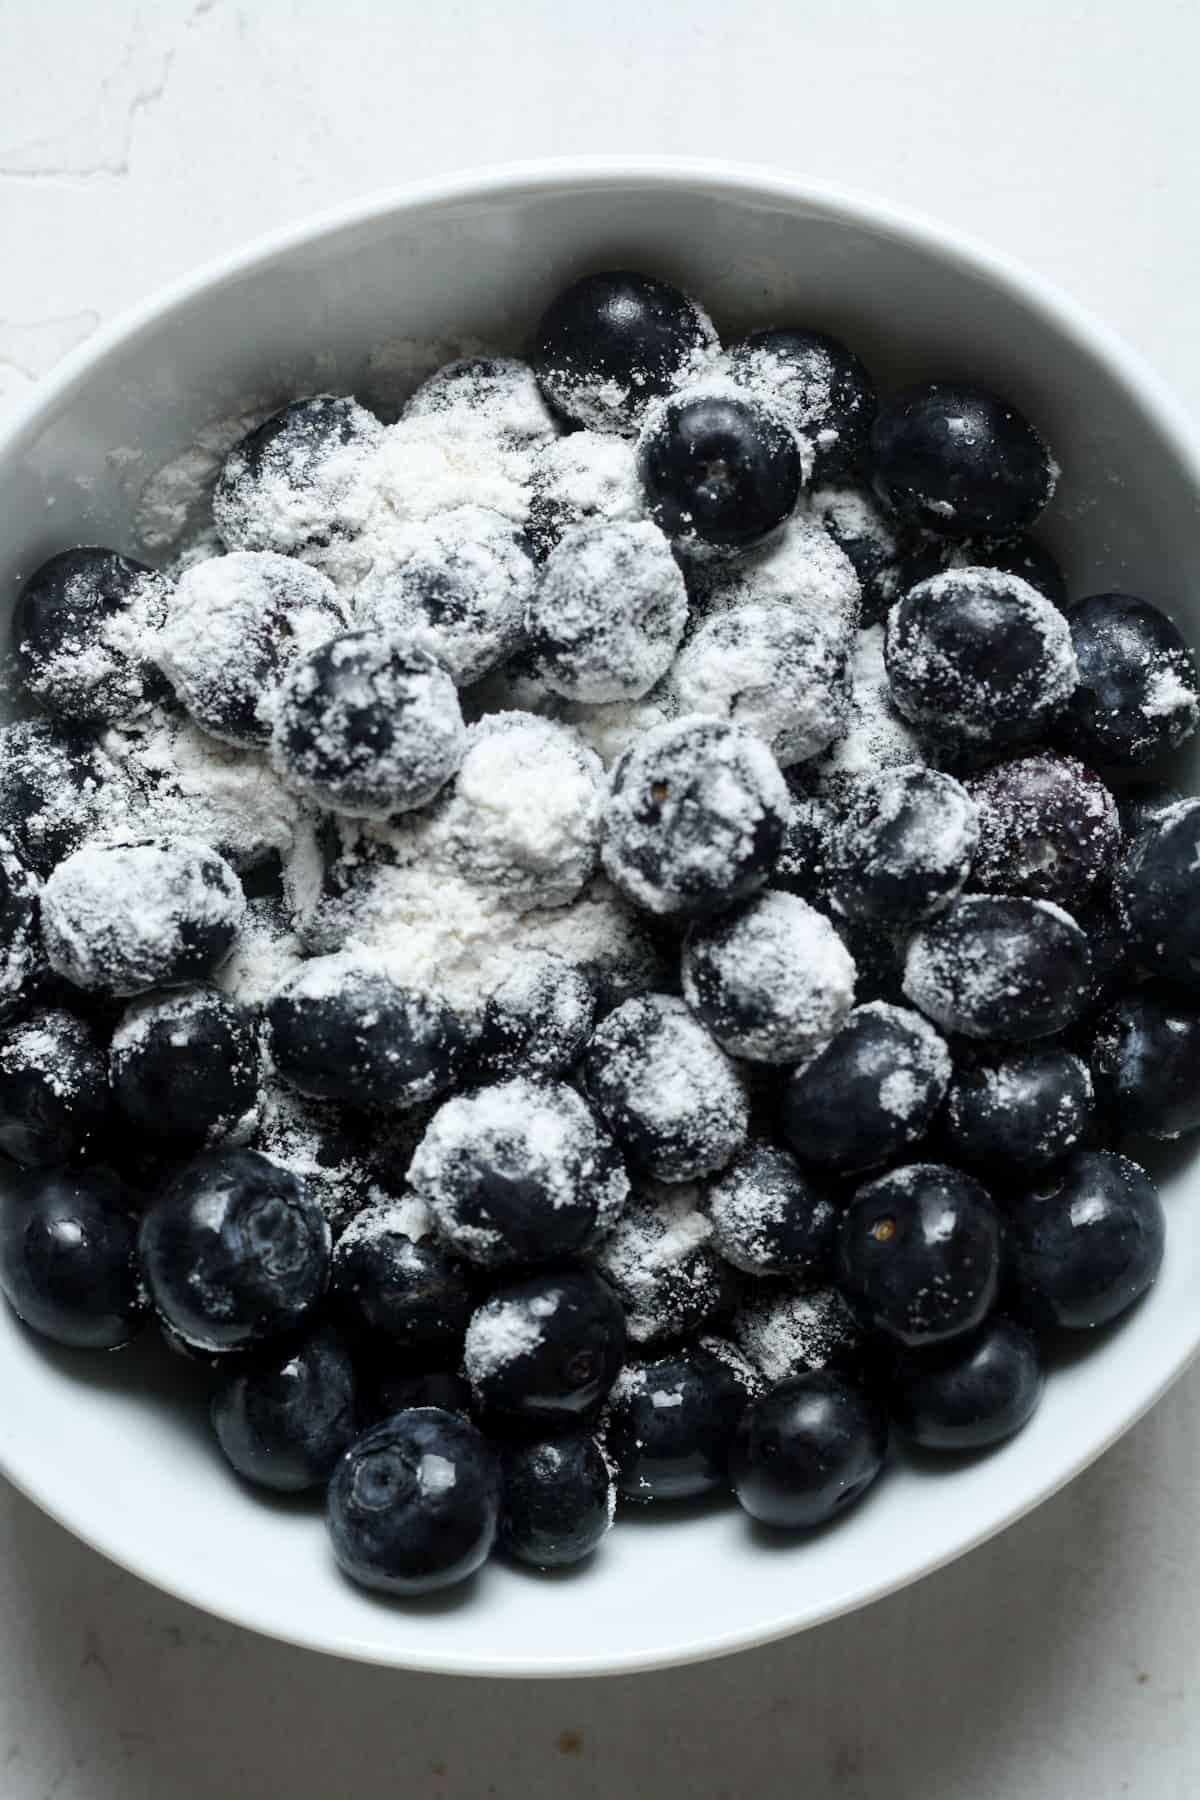 Flour covered blueberries.